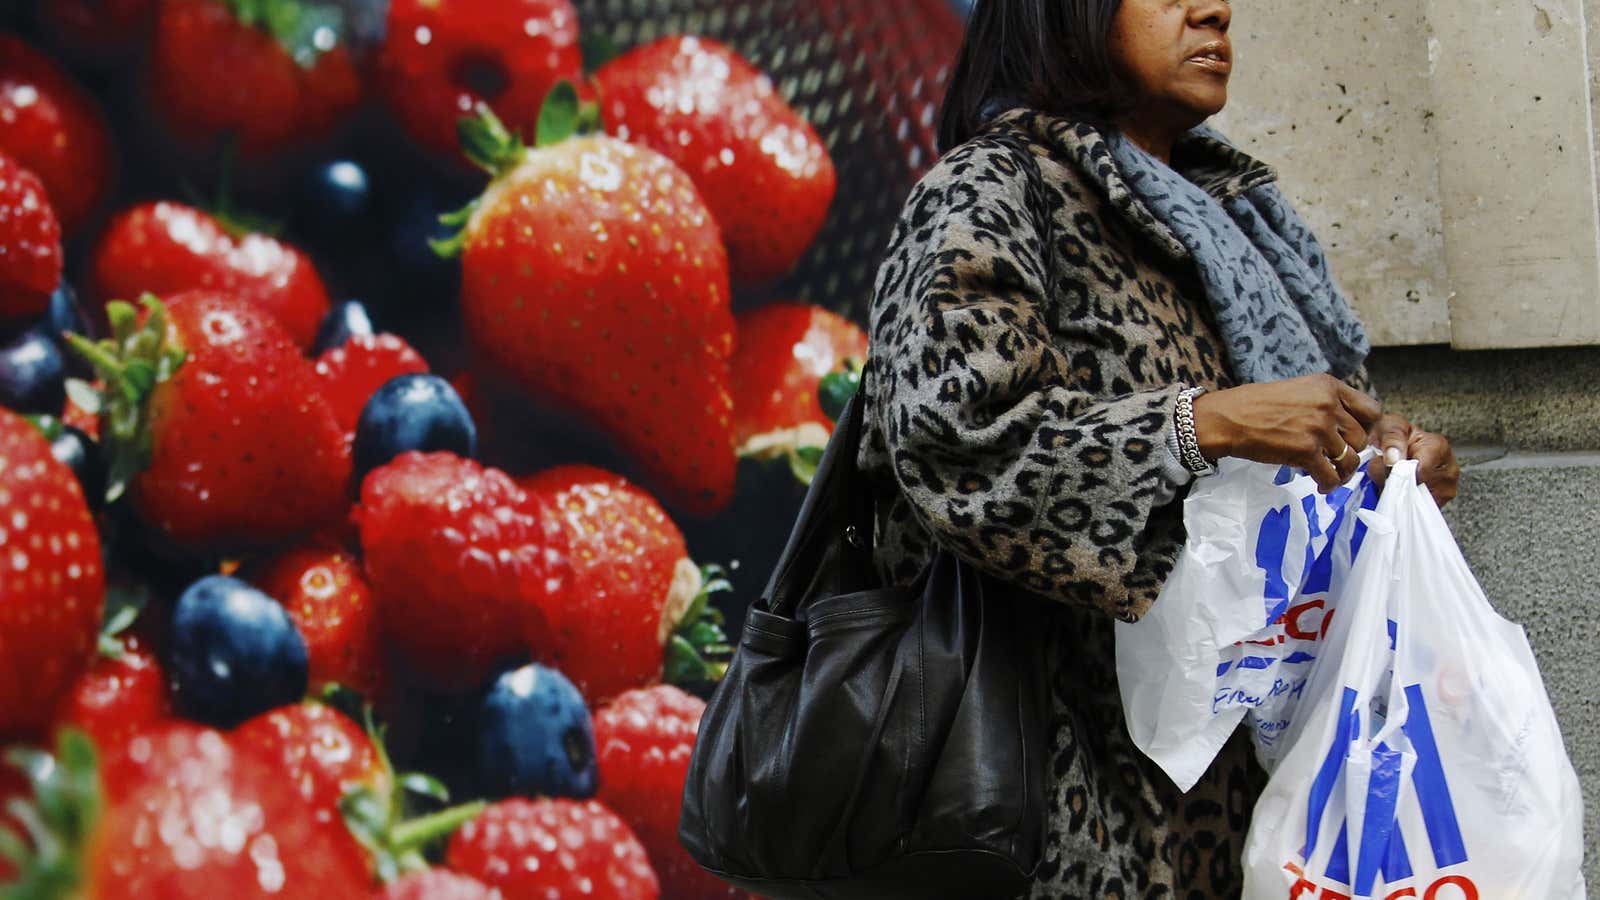 Not-so-juicy prospects for Tesco and other big supermarkets.